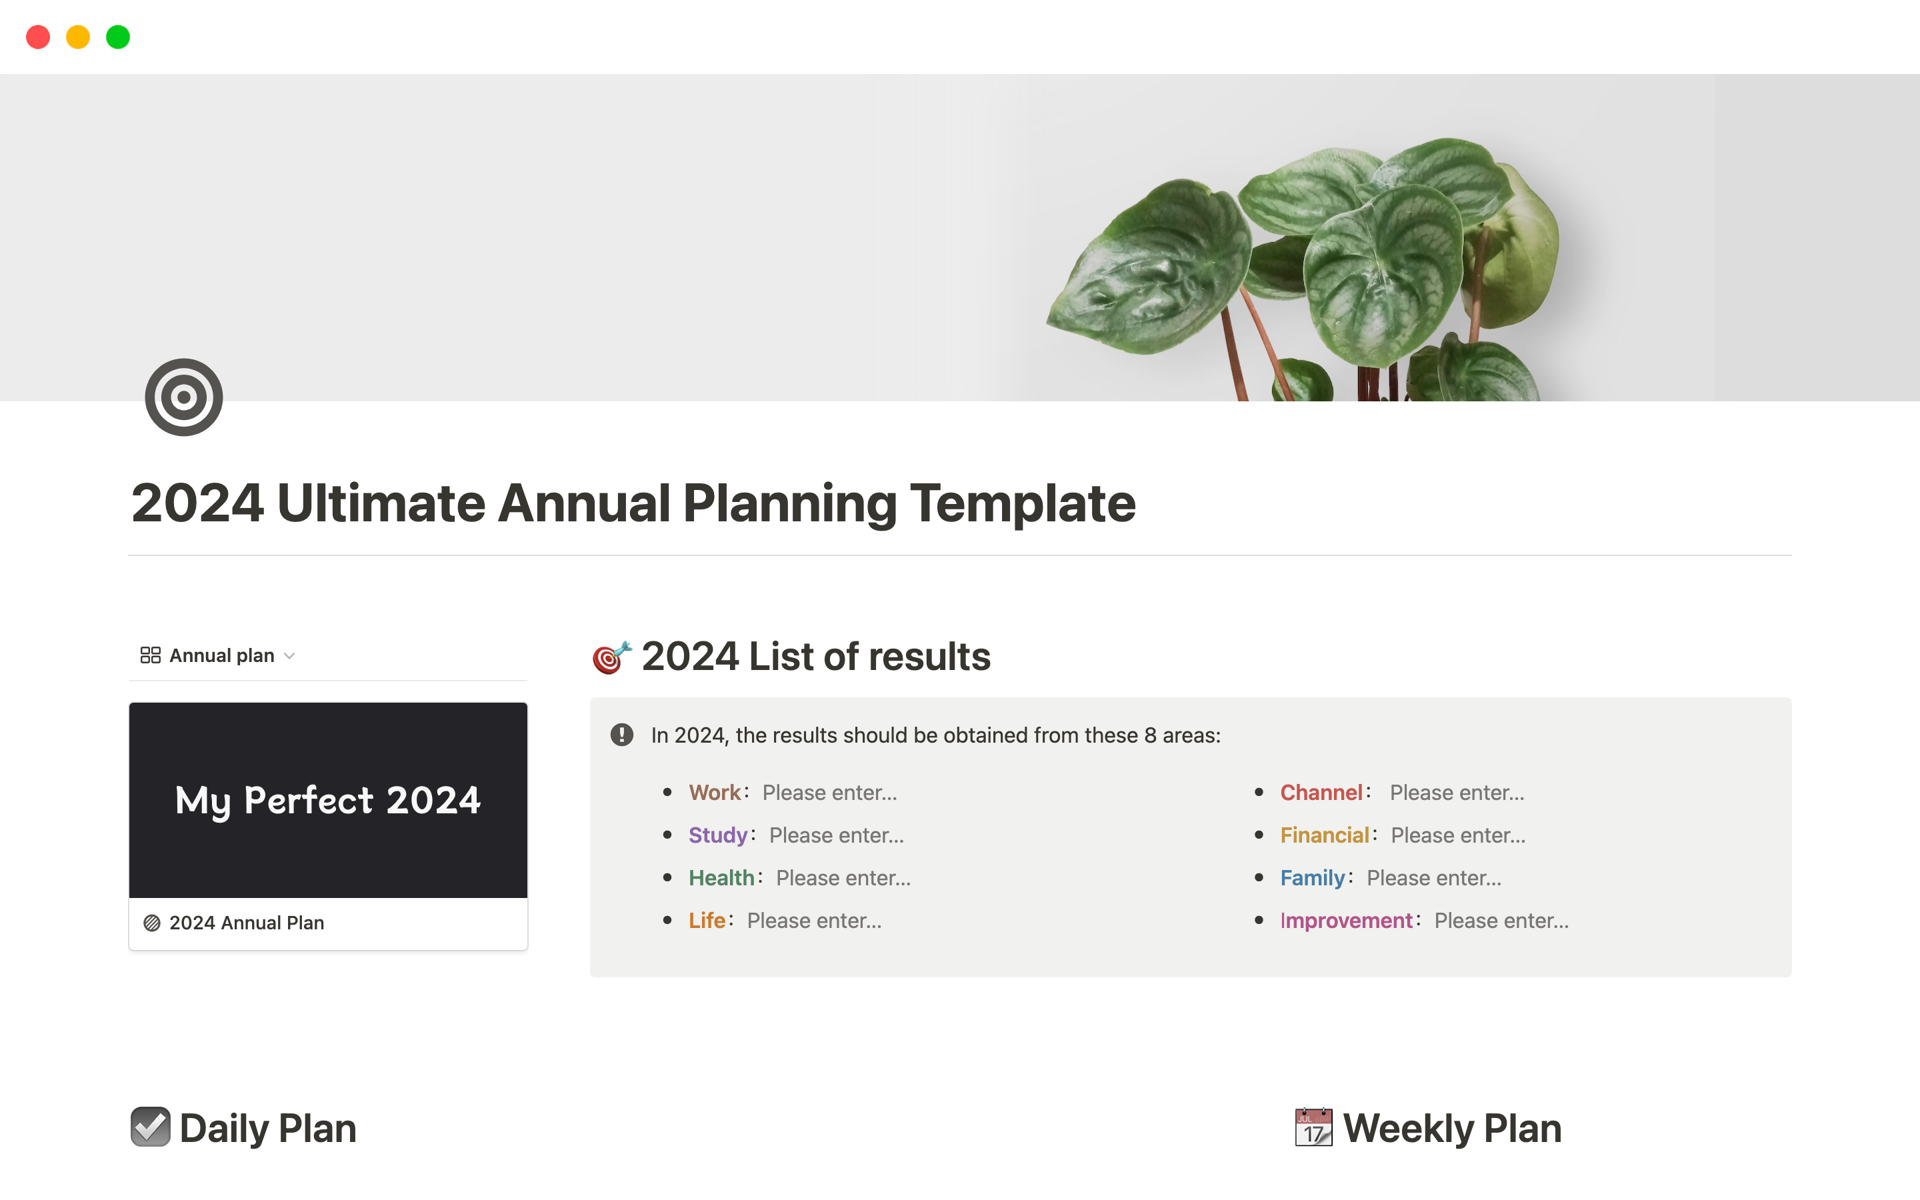 This template will assist you in formulating your annual plan, breaking down goals into monthly, weekly, and daily tasks. It streamlines the process of goal setting and execution, making it more systematic and less challenging.